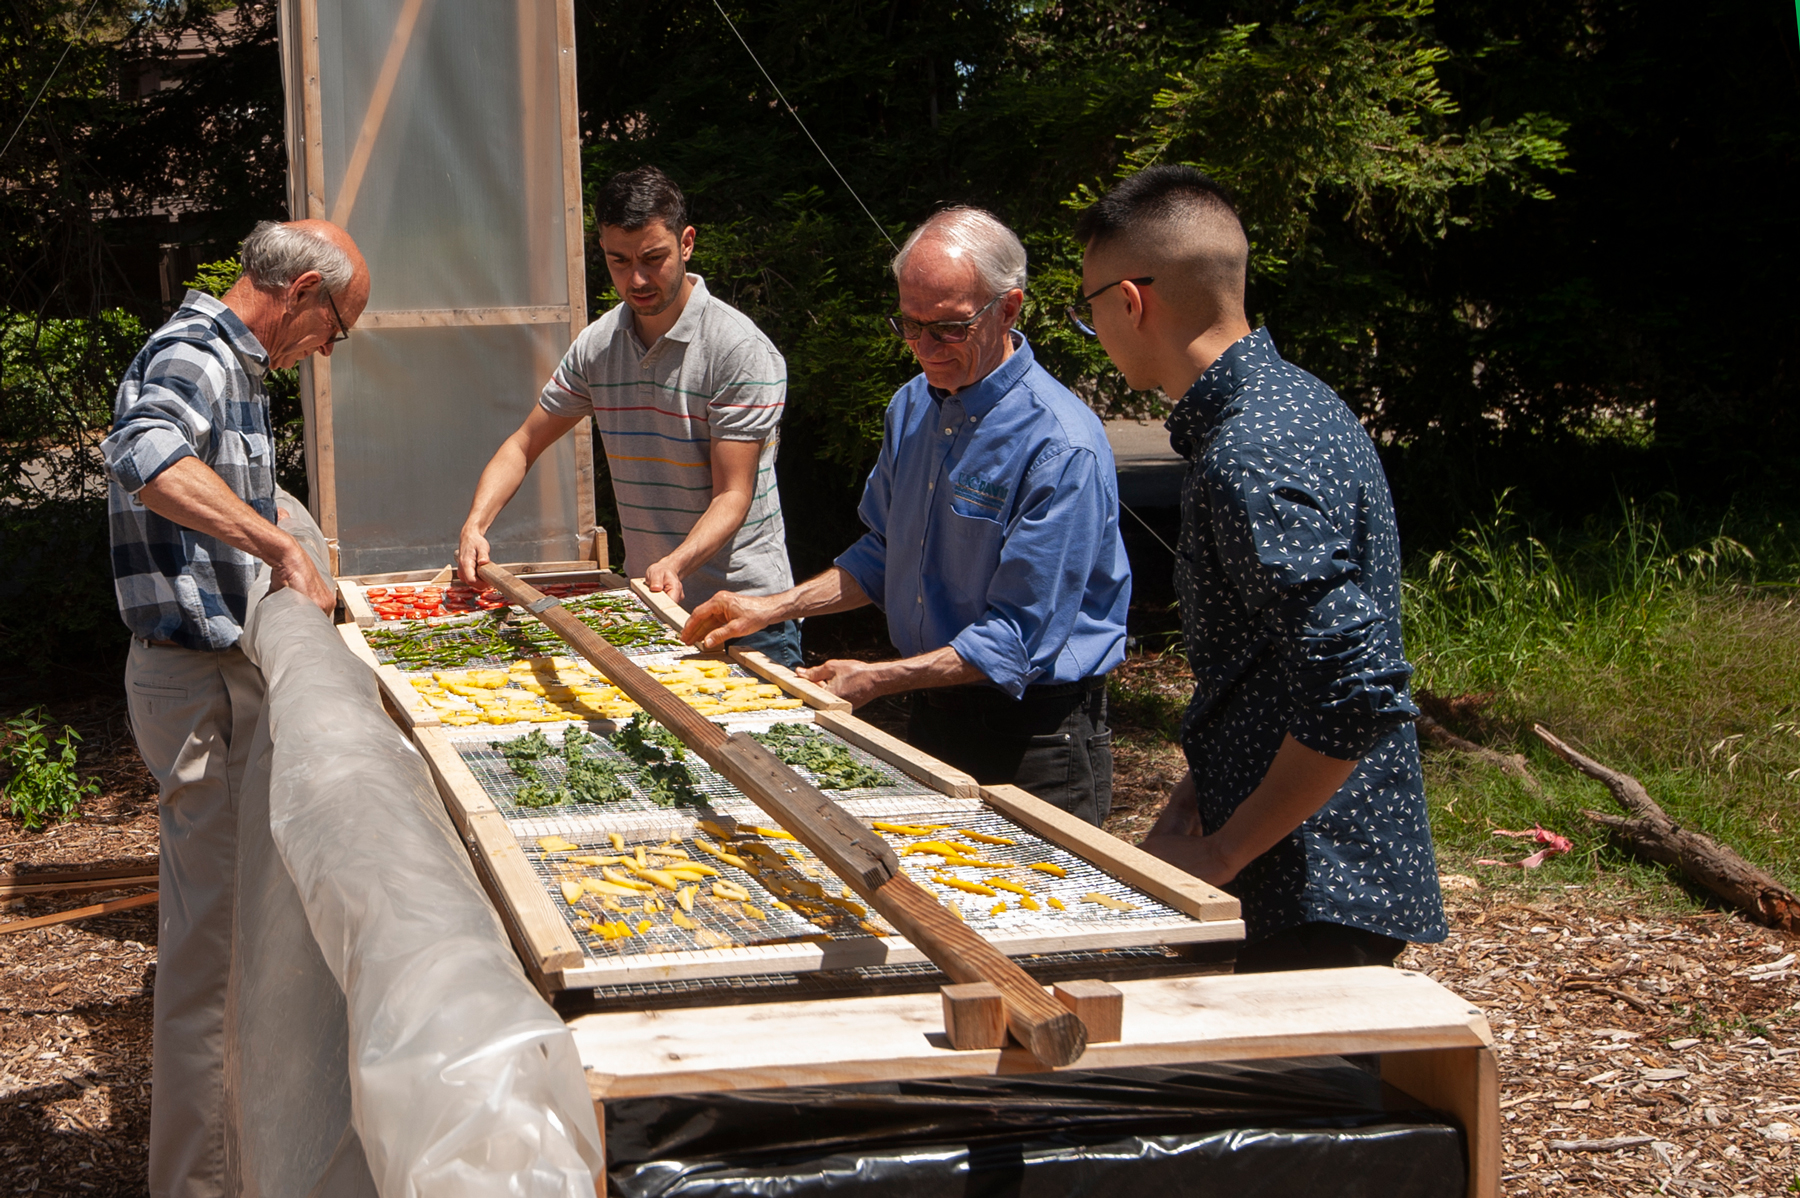 UC Davis researchers using the chimney solar dryer to dry fruits and vegetables